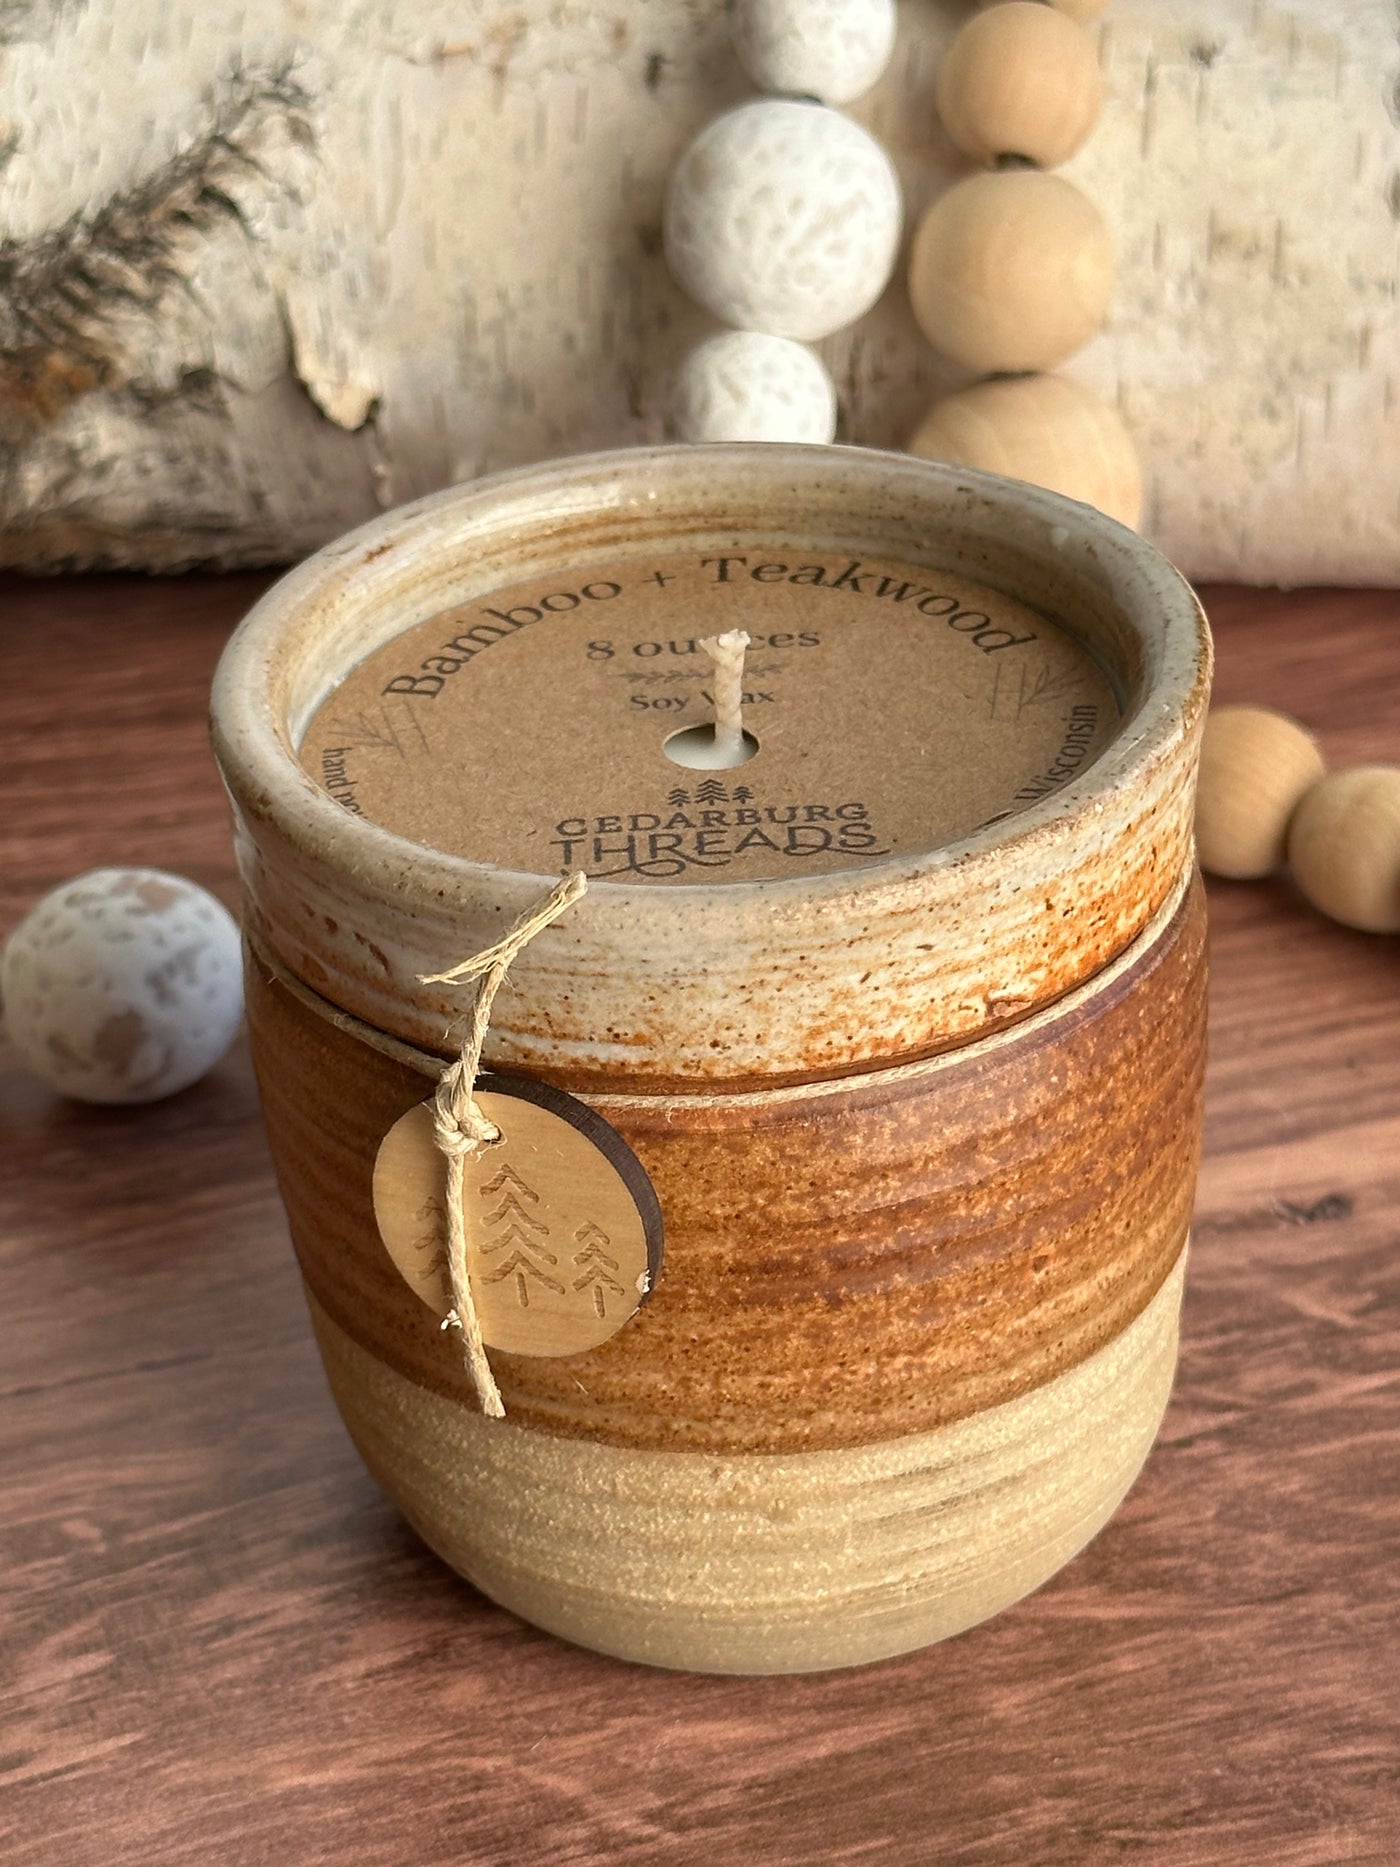 8 oz Bamboo & Teakwood soy candle in brown ceramic vessel